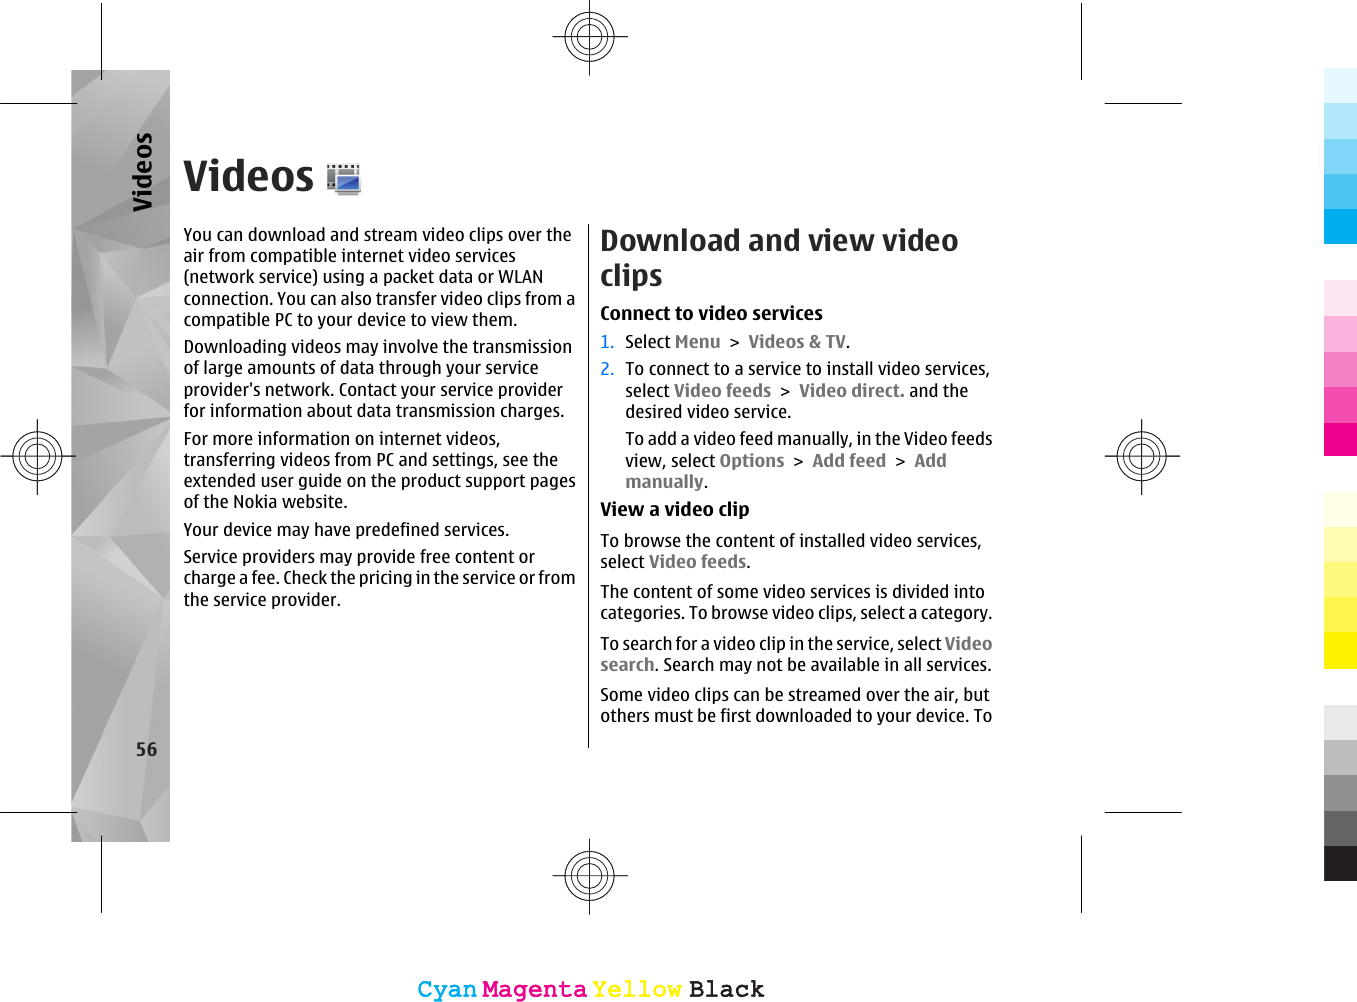 VideosYou can download and stream video clips over theair from compatible internet video services(network service) using a packet data or WLANconnection. You can also transfer video clips from acompatible PC to your device to view them.Downloading videos may involve the transmissionof large amounts of data through your serviceprovider&apos;s network. Contact your service providerfor information about data transmission charges.For more information on internet videos,transferring videos from PC and settings, see theextended user guide on the product support pagesof the Nokia website.Your device may have predefined services.Service providers may provide free content orcharge a fee. Check the pricing in the service or fromthe service provider.Download and view videoclipsConnect to video services1. Select Menu &gt; Videos &amp; TV.2. To connect to a service to install video services,select Video feeds &gt; Video direct. and thedesired video service.To add a video feed manually, in the Video feedsview, select Options &gt; Add feed &gt; Addmanually.View a video clipTo browse the content of installed video services,select Video feeds.The content of some video services is divided intocategories. To browse video clips, select a category.To search for a video clip in the service, select Videosearch. Search may not be available in all services.Some video clips can be streamed over the air, butothers must be first downloaded to your device. To56VideosCyanCyanMagentaMagentaYellowYellowBlackBlackCyanCyanMagentaMagentaYellowYellowBlackBlack